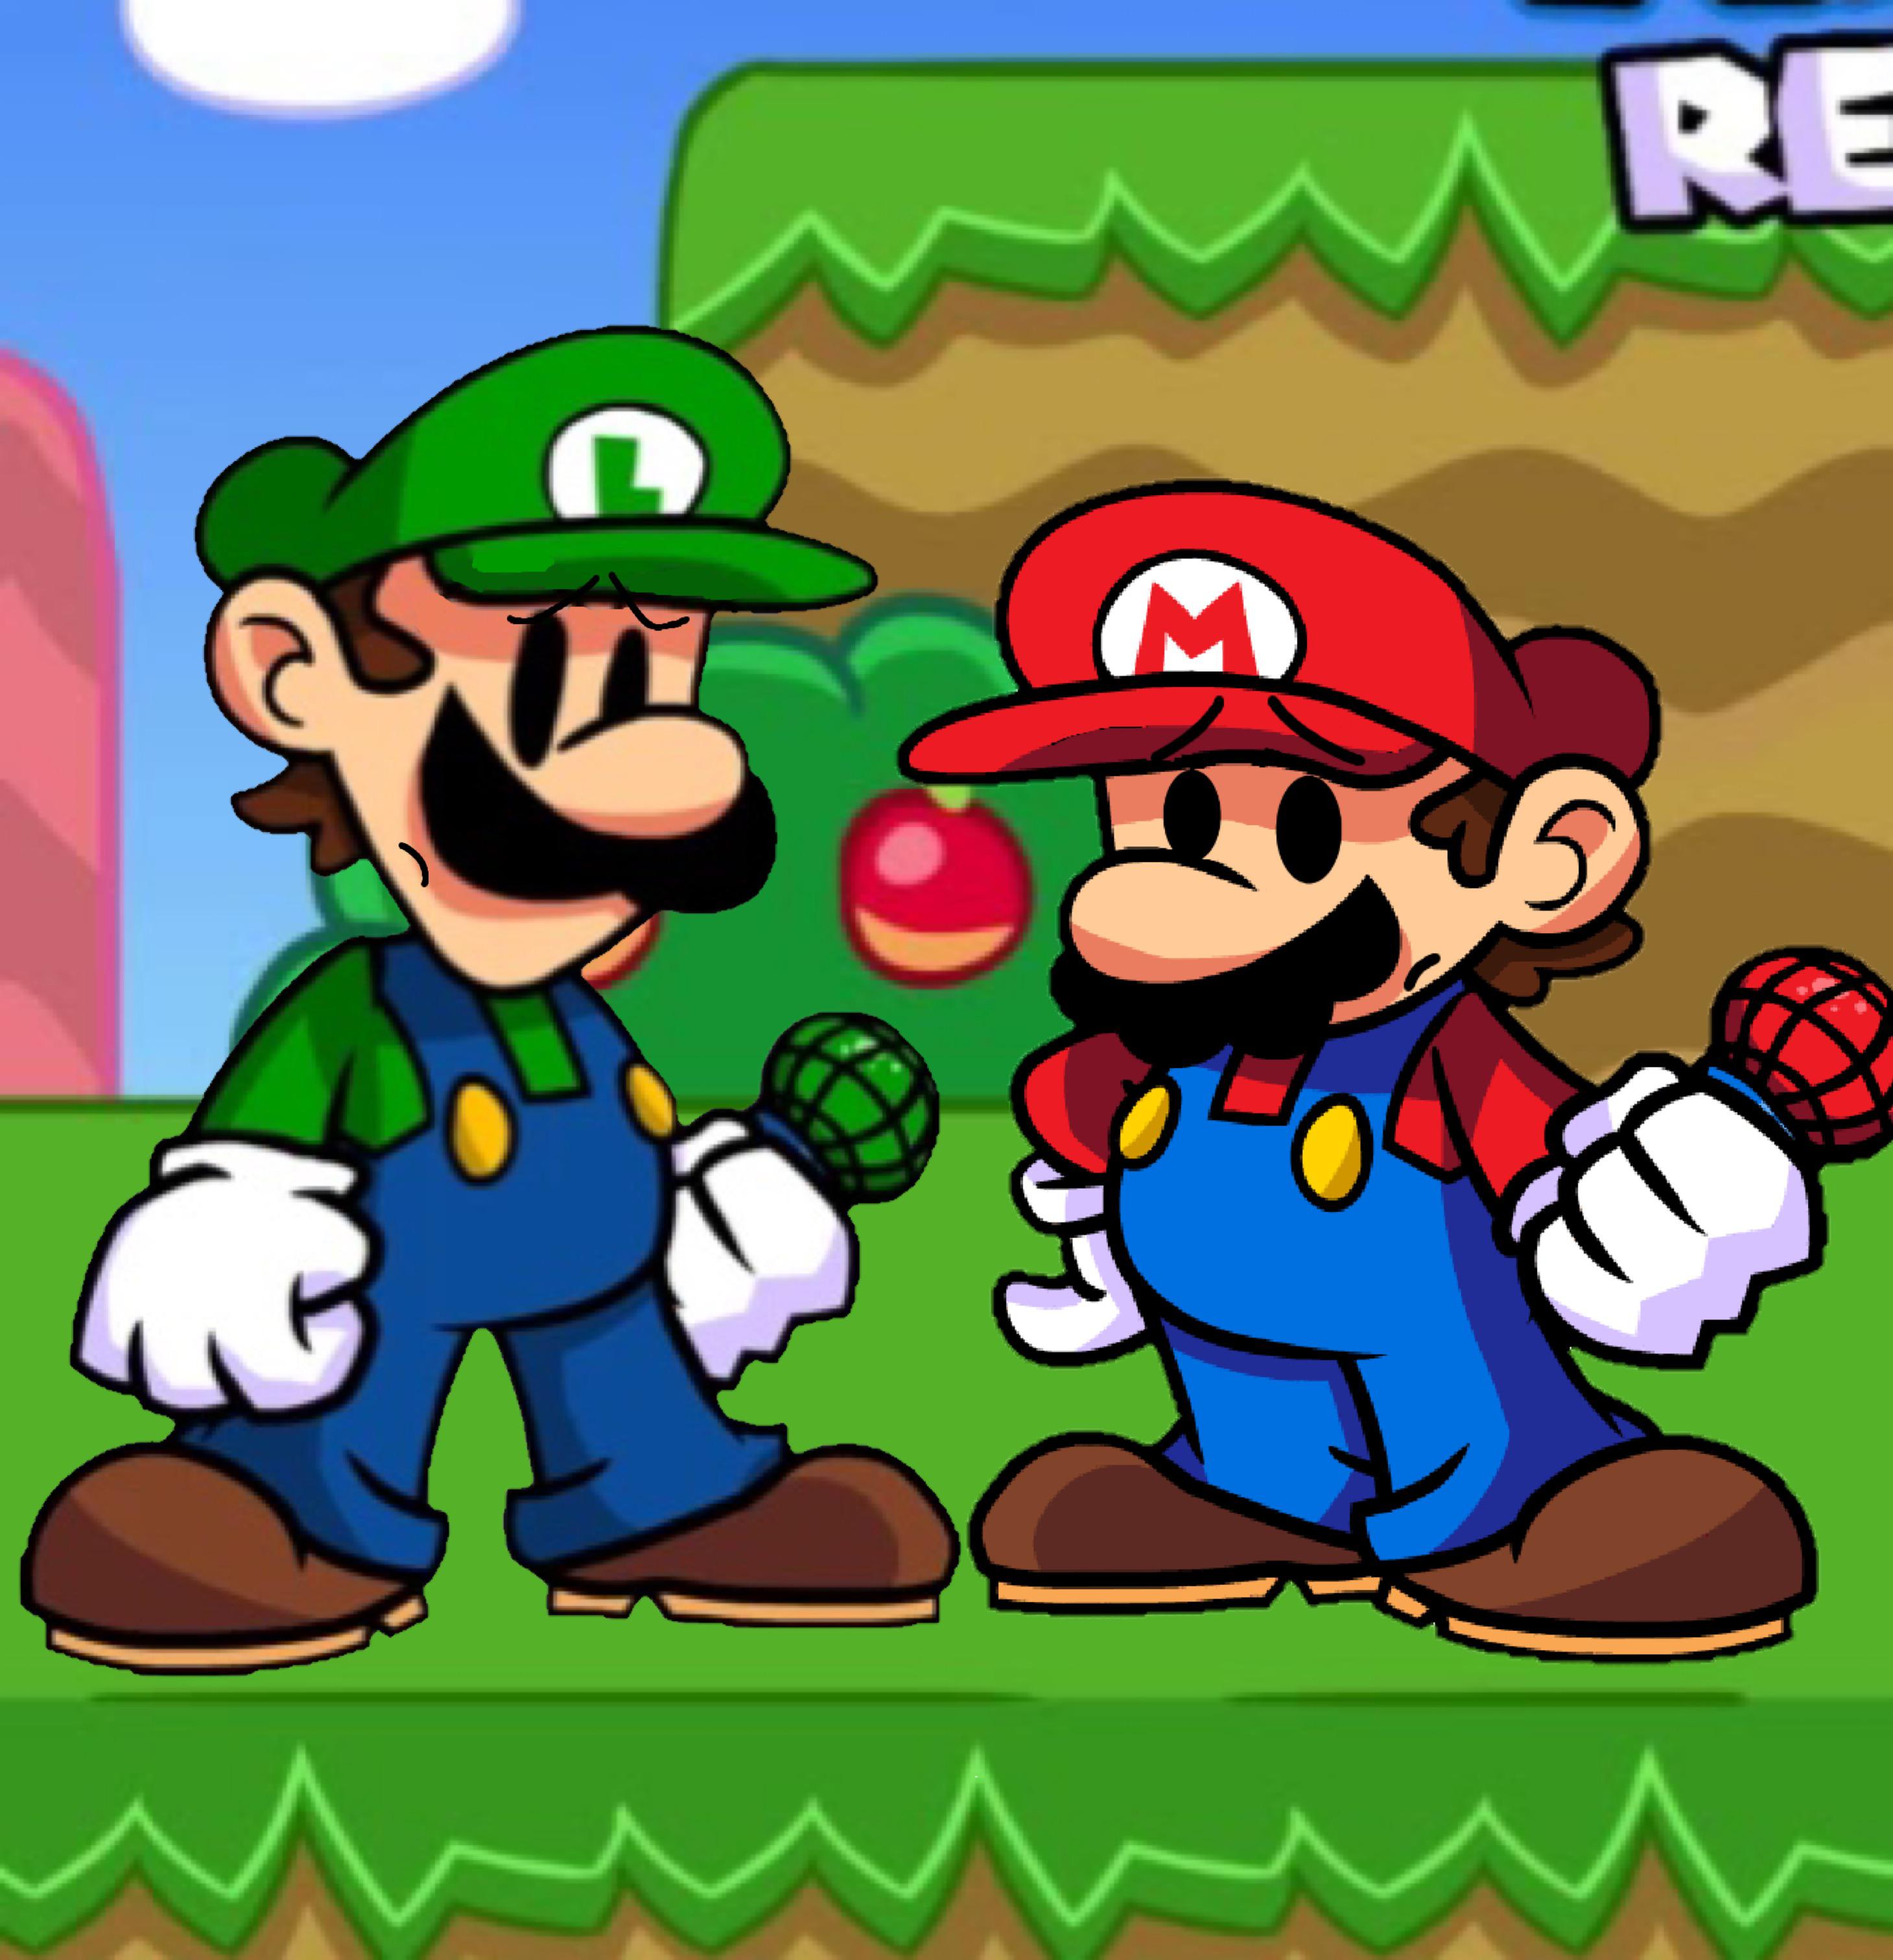 Can we please talk about how Mario mods are barely talked about in this community